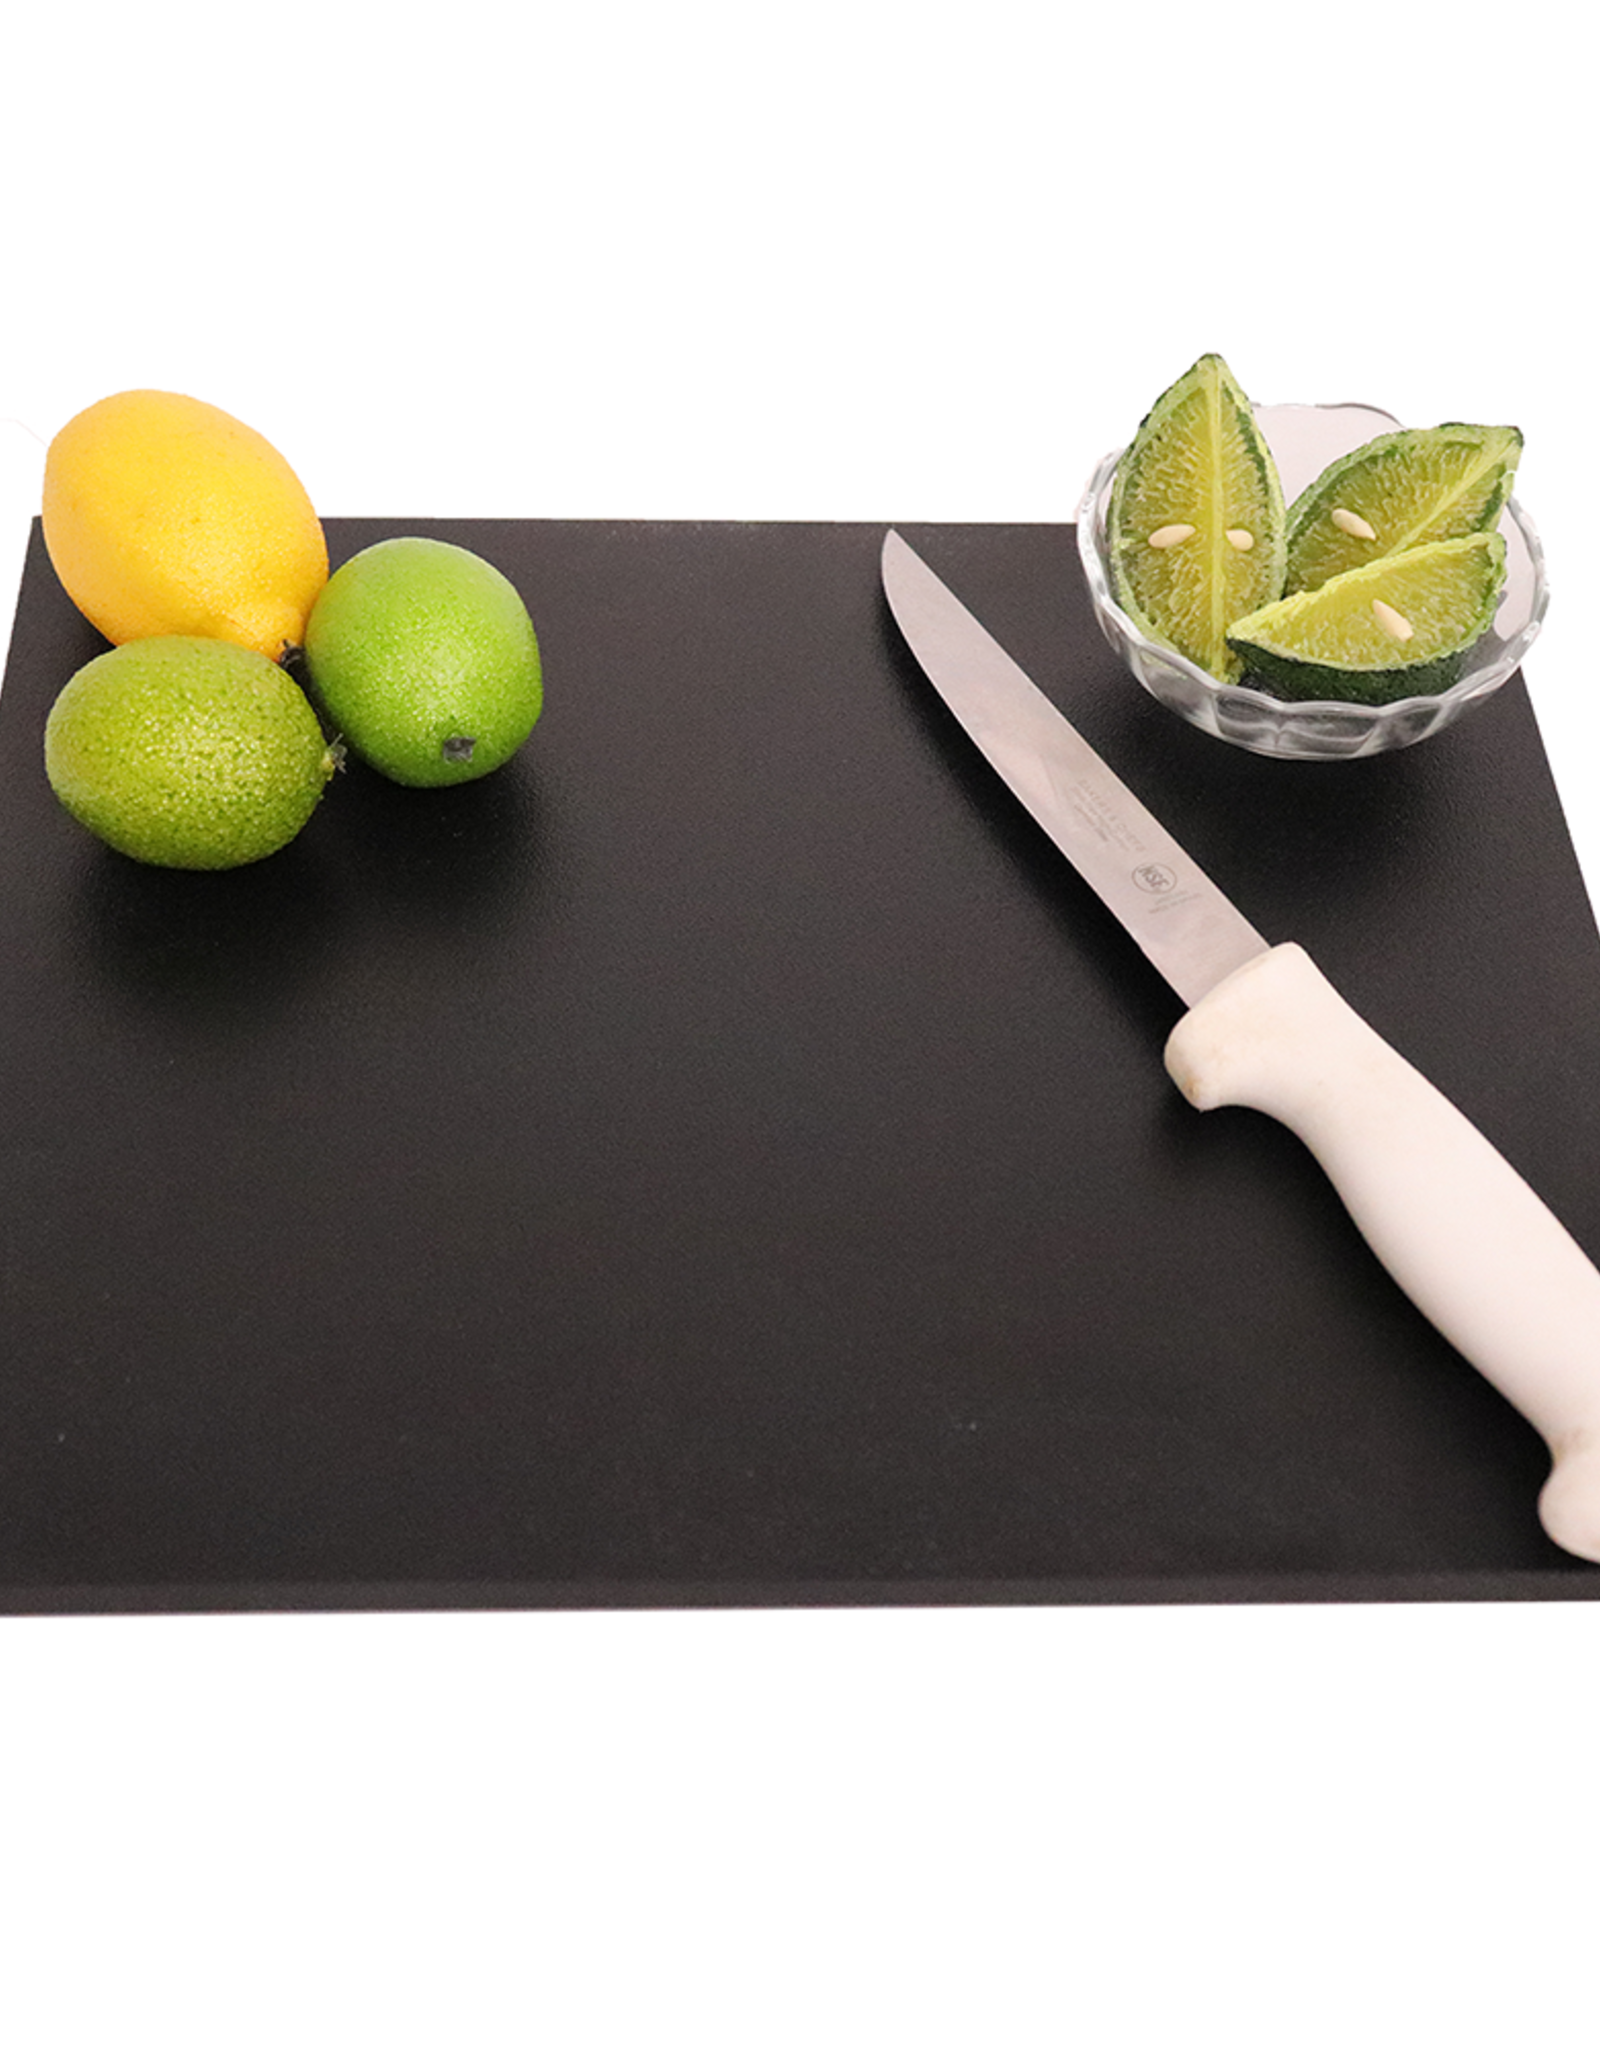 Renaissance Cooking Systems Cutting Board for the RSNK2 & RSNK4 Sinks - RCB2